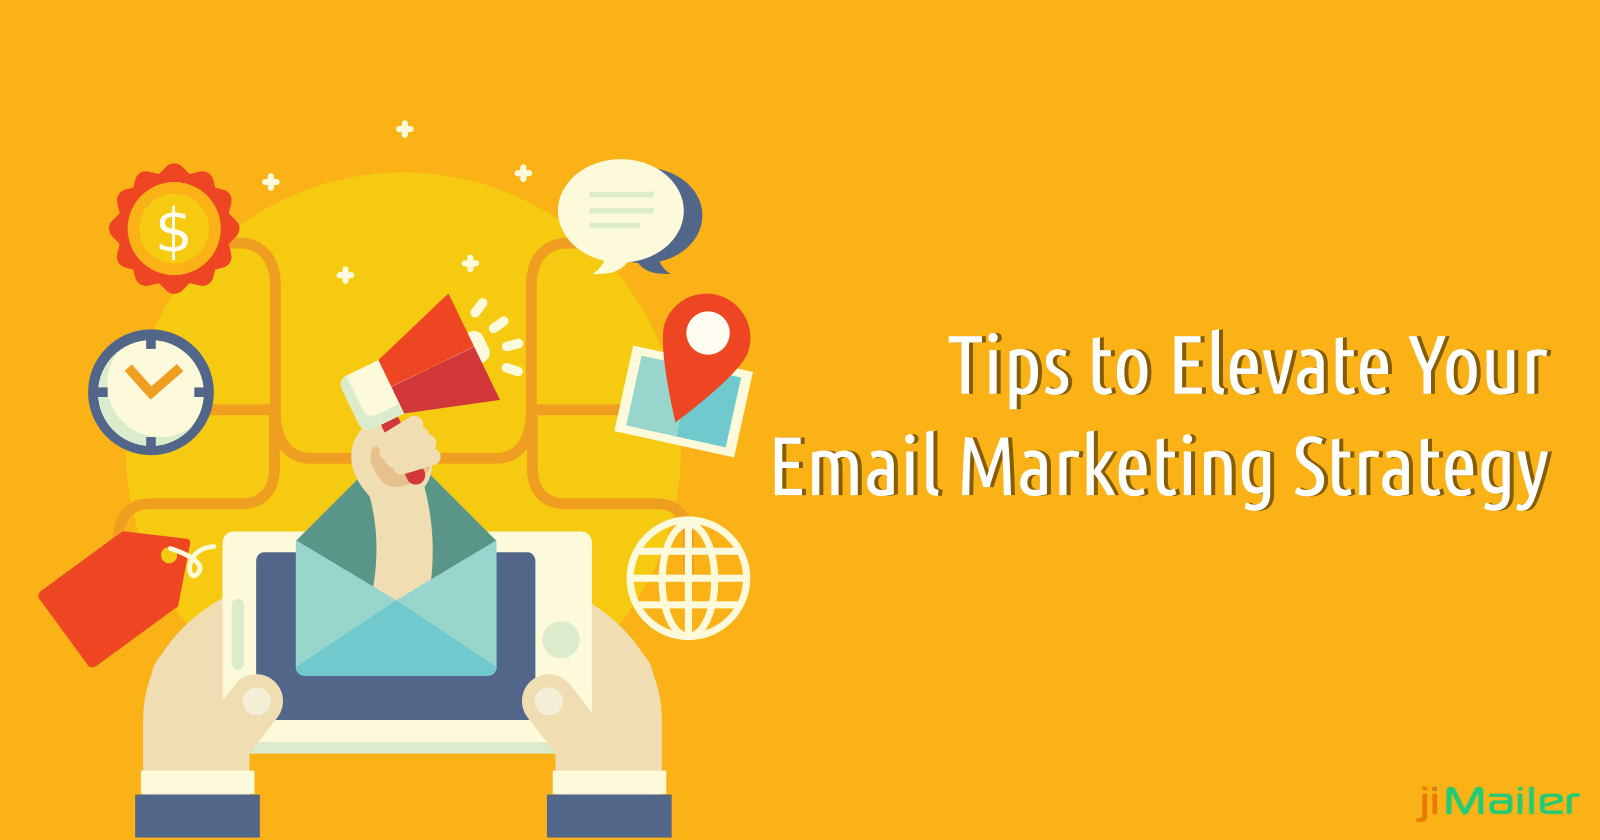 Tips to Elevate Your Email Marketing Strategy